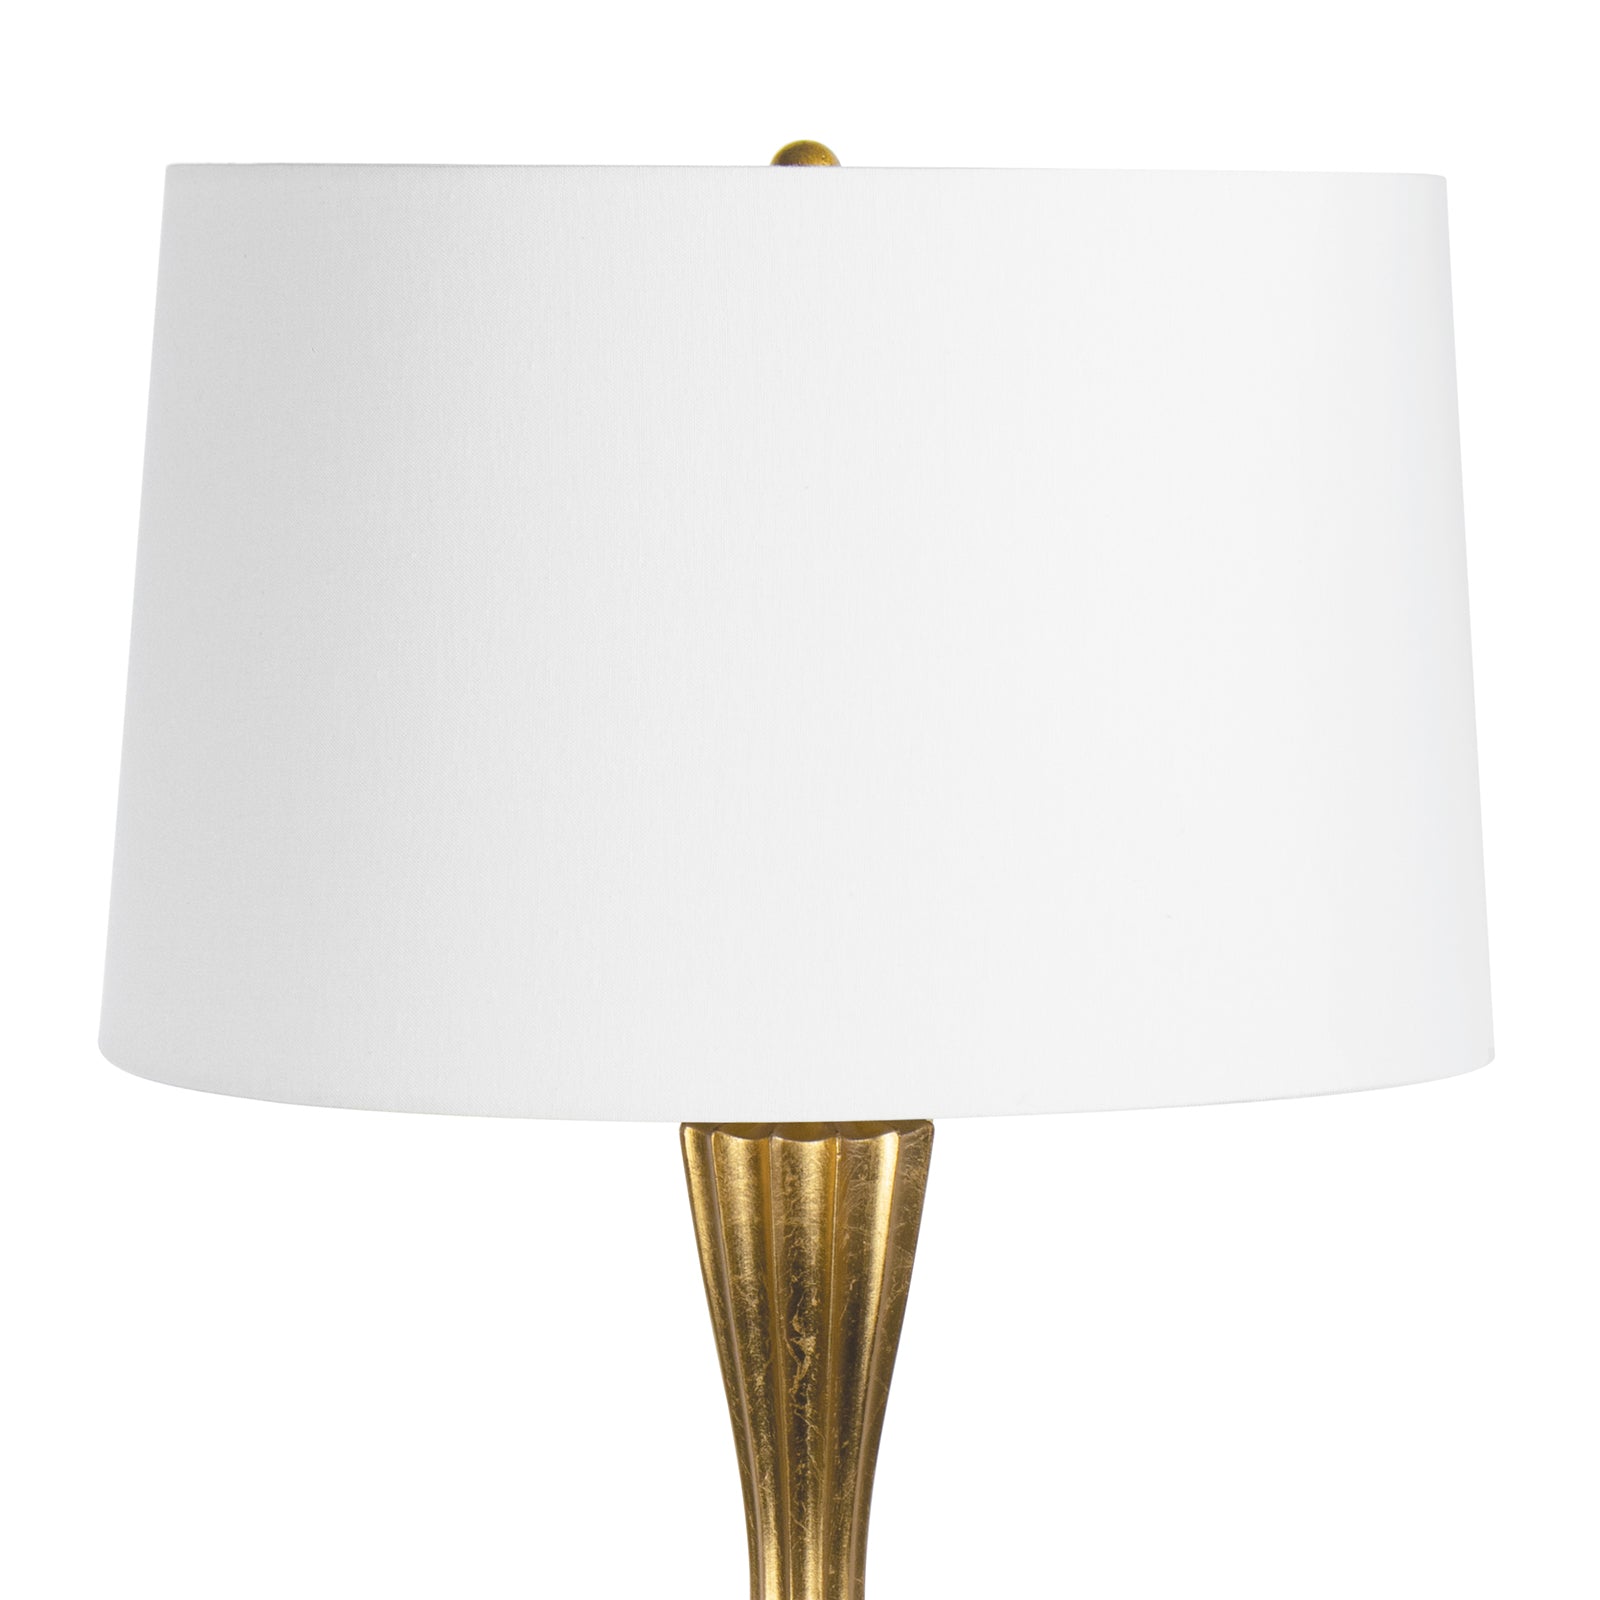 Southern Living Naomi Resin Table Lamp in Gold Leaf